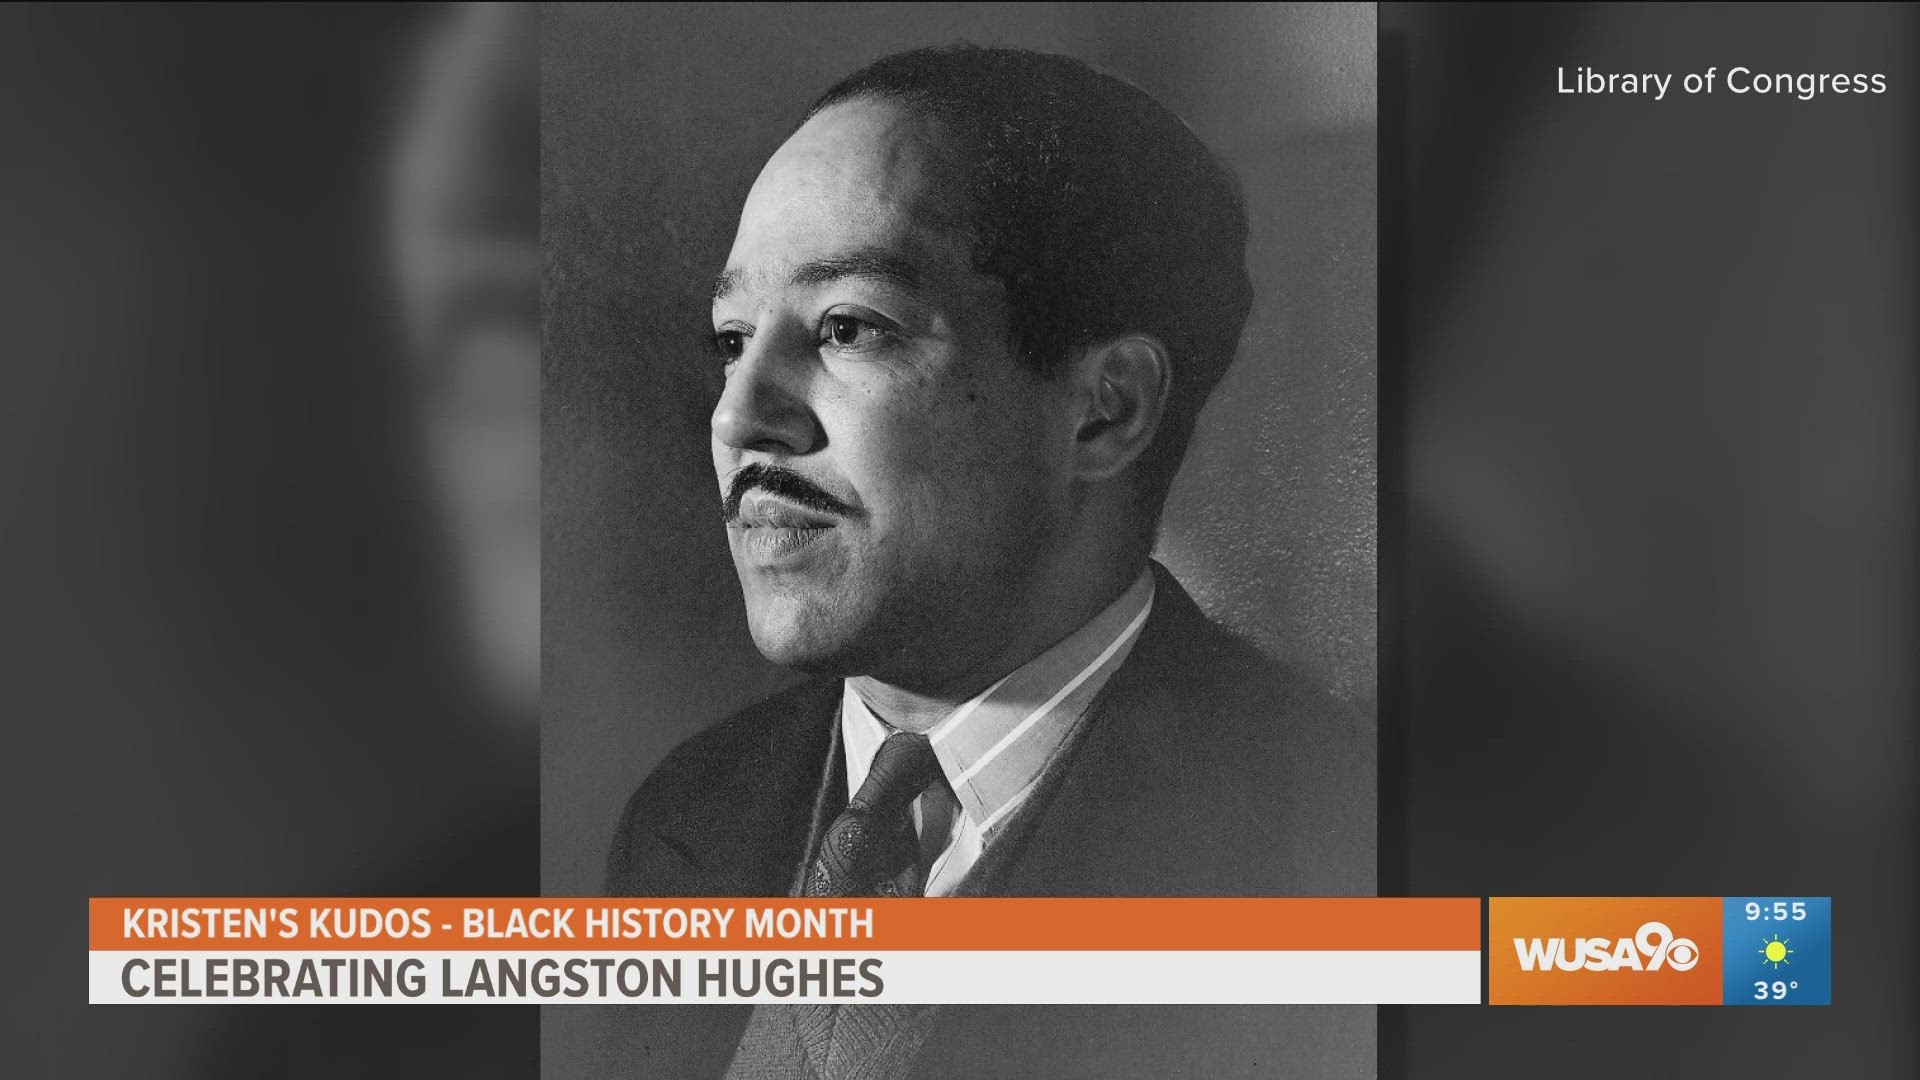 Kristen and Ellen kick off Black History Month with a tribute to influential writer and poet Langston Hughes who is best known as a leader of the Harlem Renaissance.